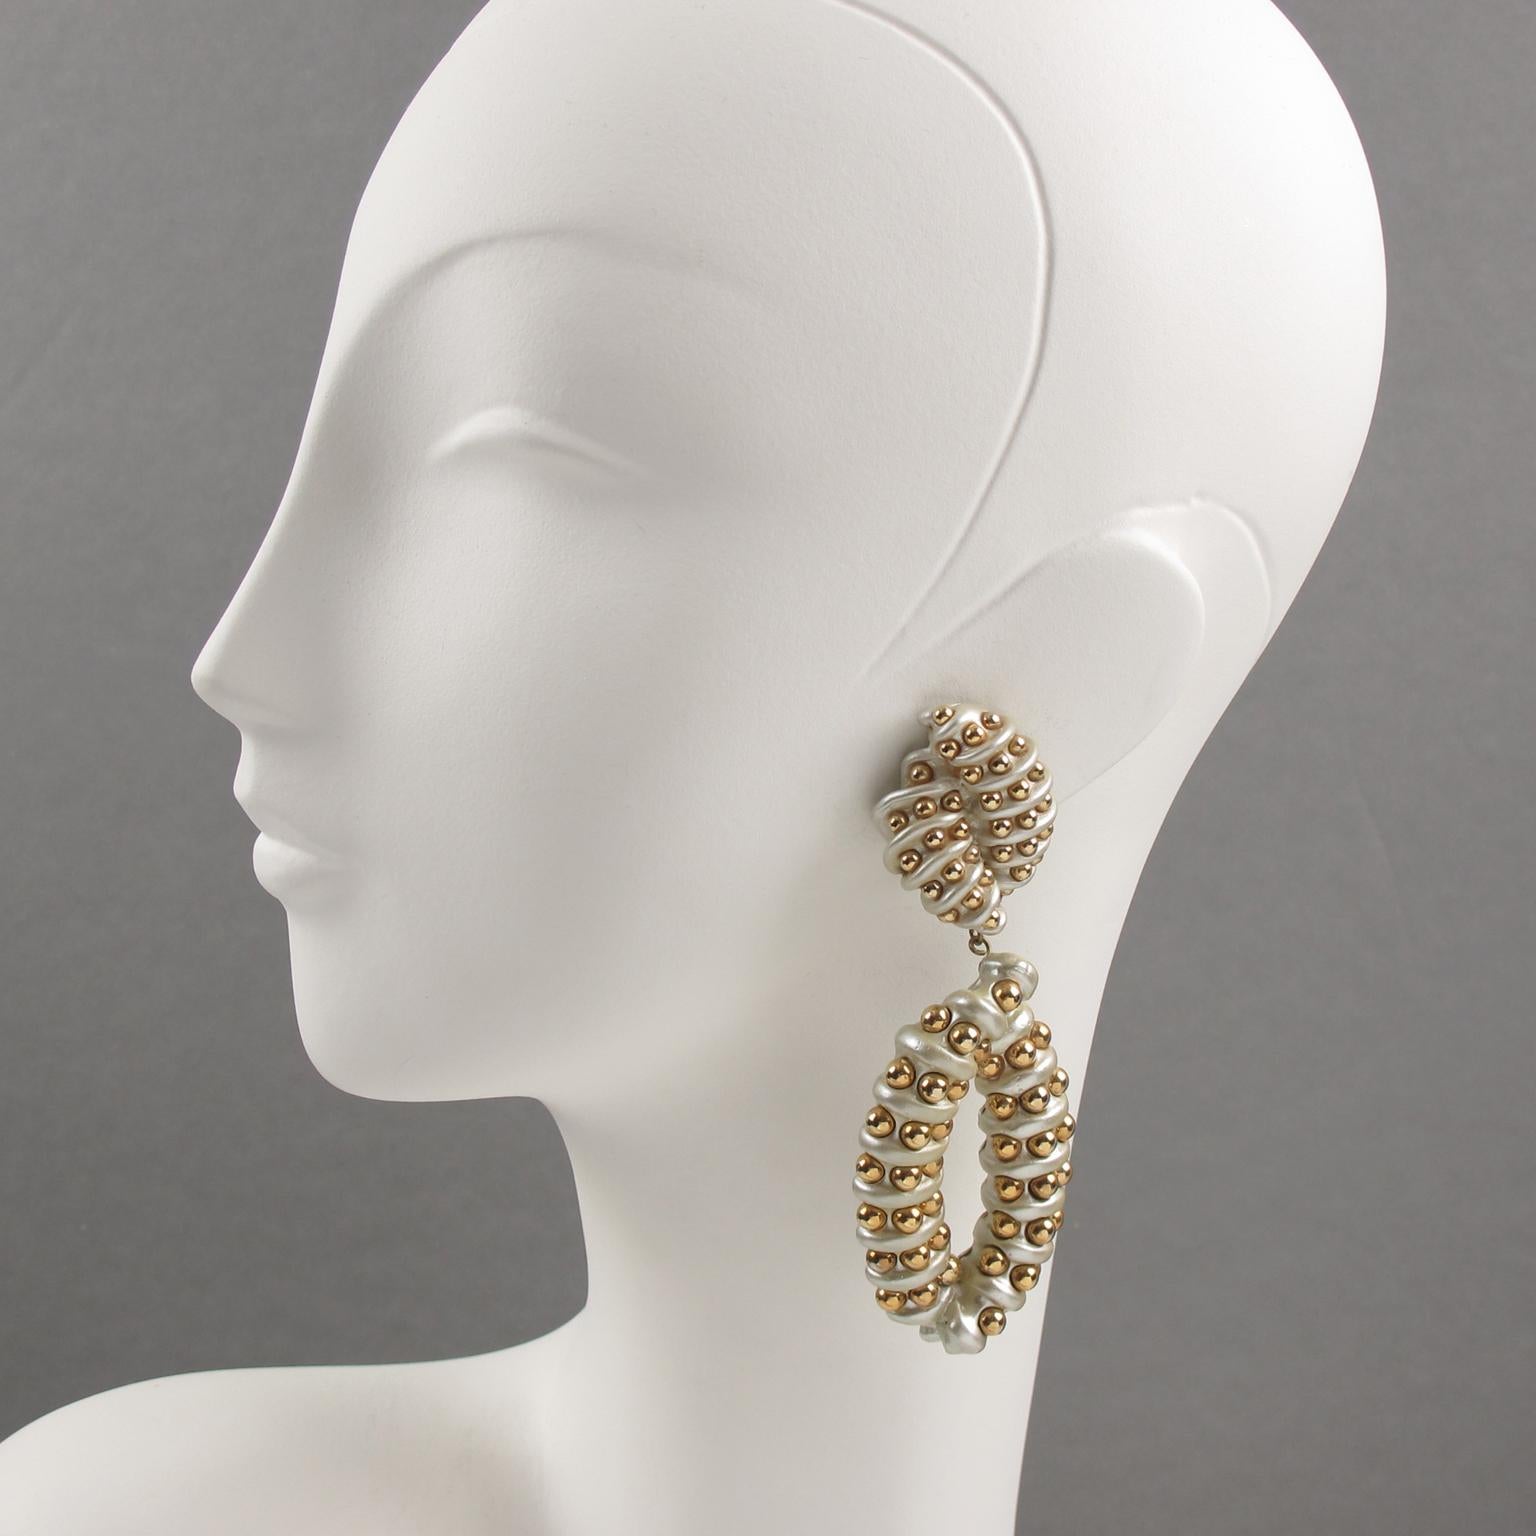 Impressive 1980s oversized chandelier clip-on earrings designed by Jewellians. They feature a spectacular shoulder-duster dangling shape with white pearlized resin ornate with gilded metal caviar seed beads. The Jewellians company logo is at the